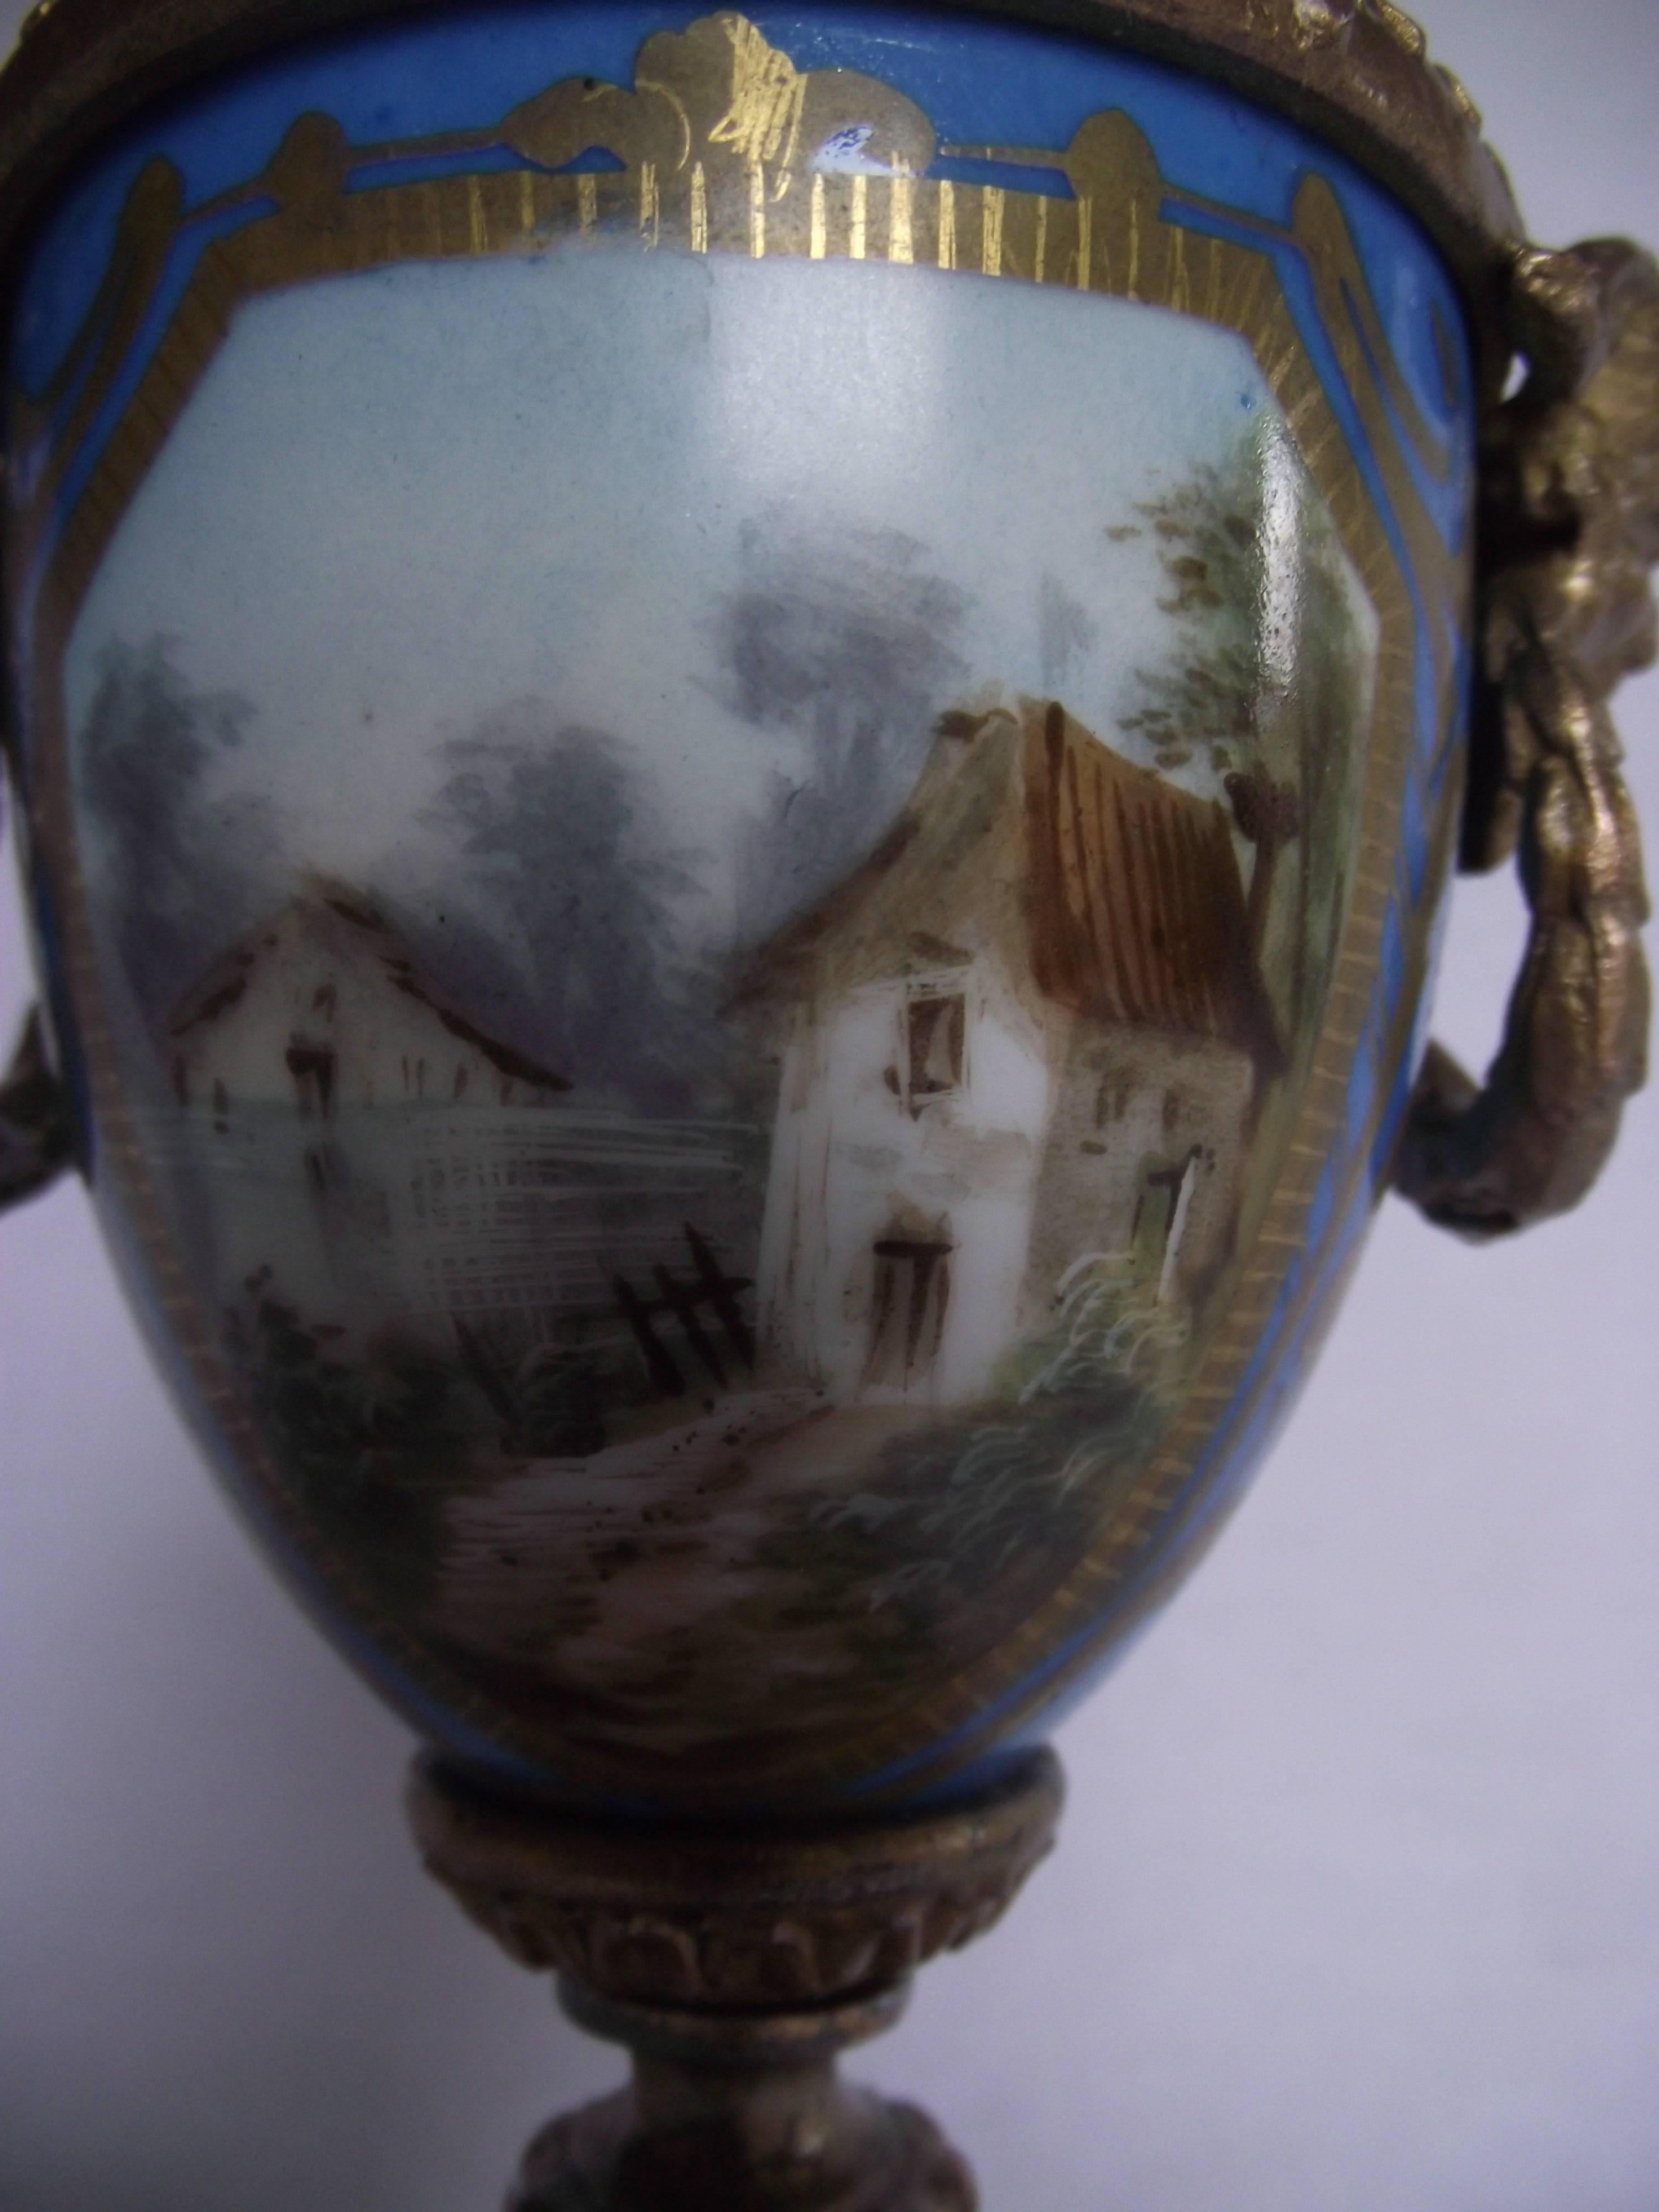 Beautiful little Sèvres style gilt metal scenic hand-painted porcelain urn. Side mounts feature a Sartre face and wreath. A very distinctive piece for a book shelf or tabletop.